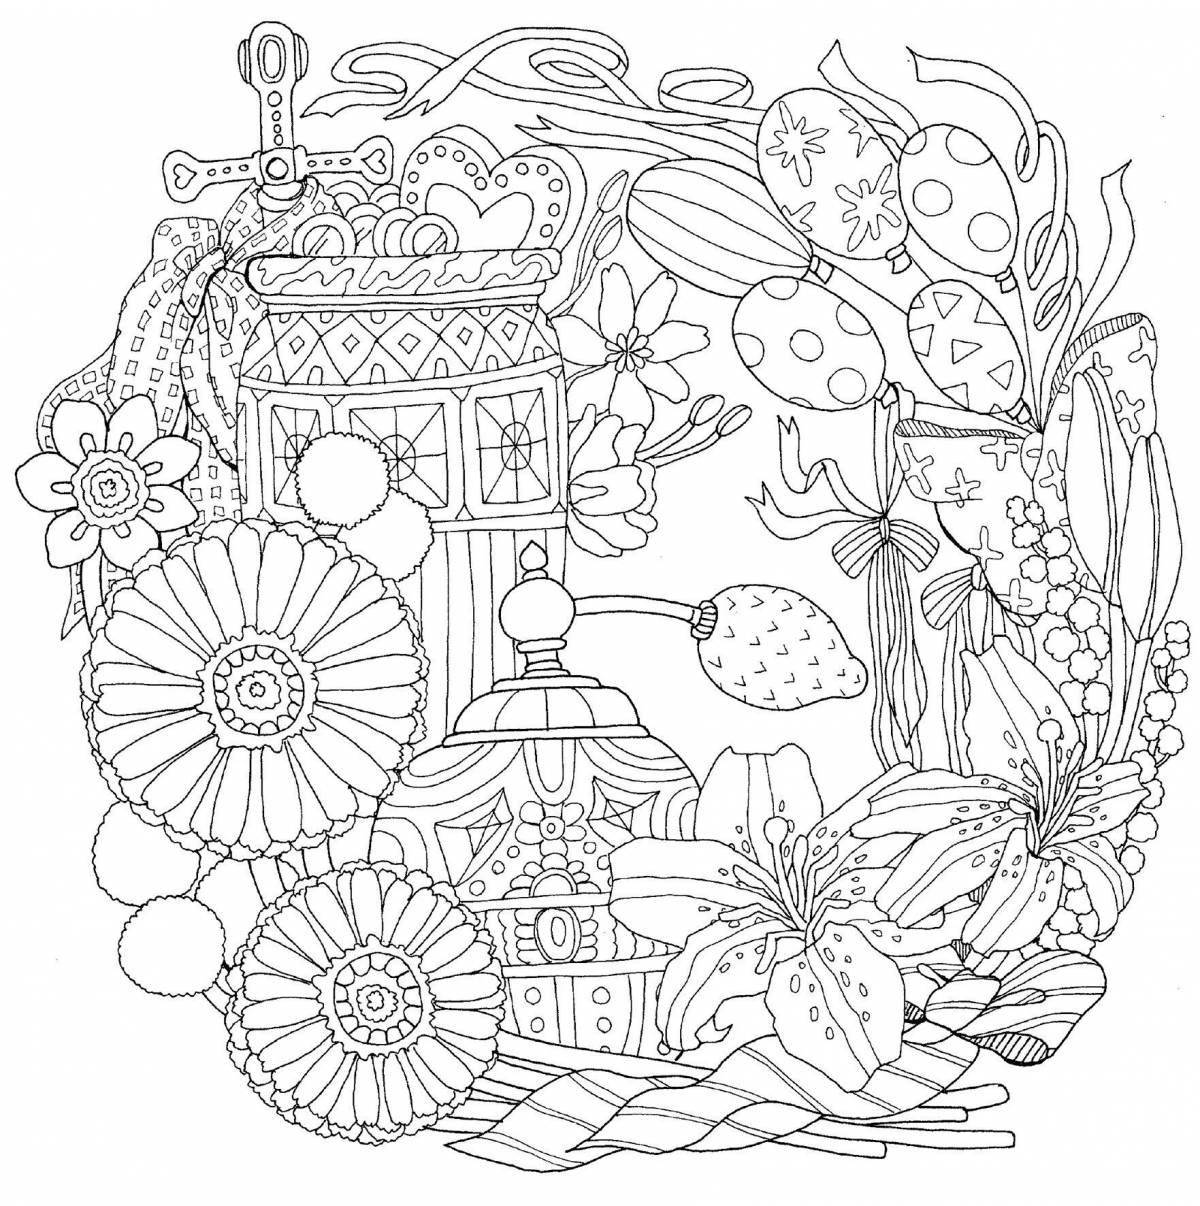 Cleansing anti-stress coloring game